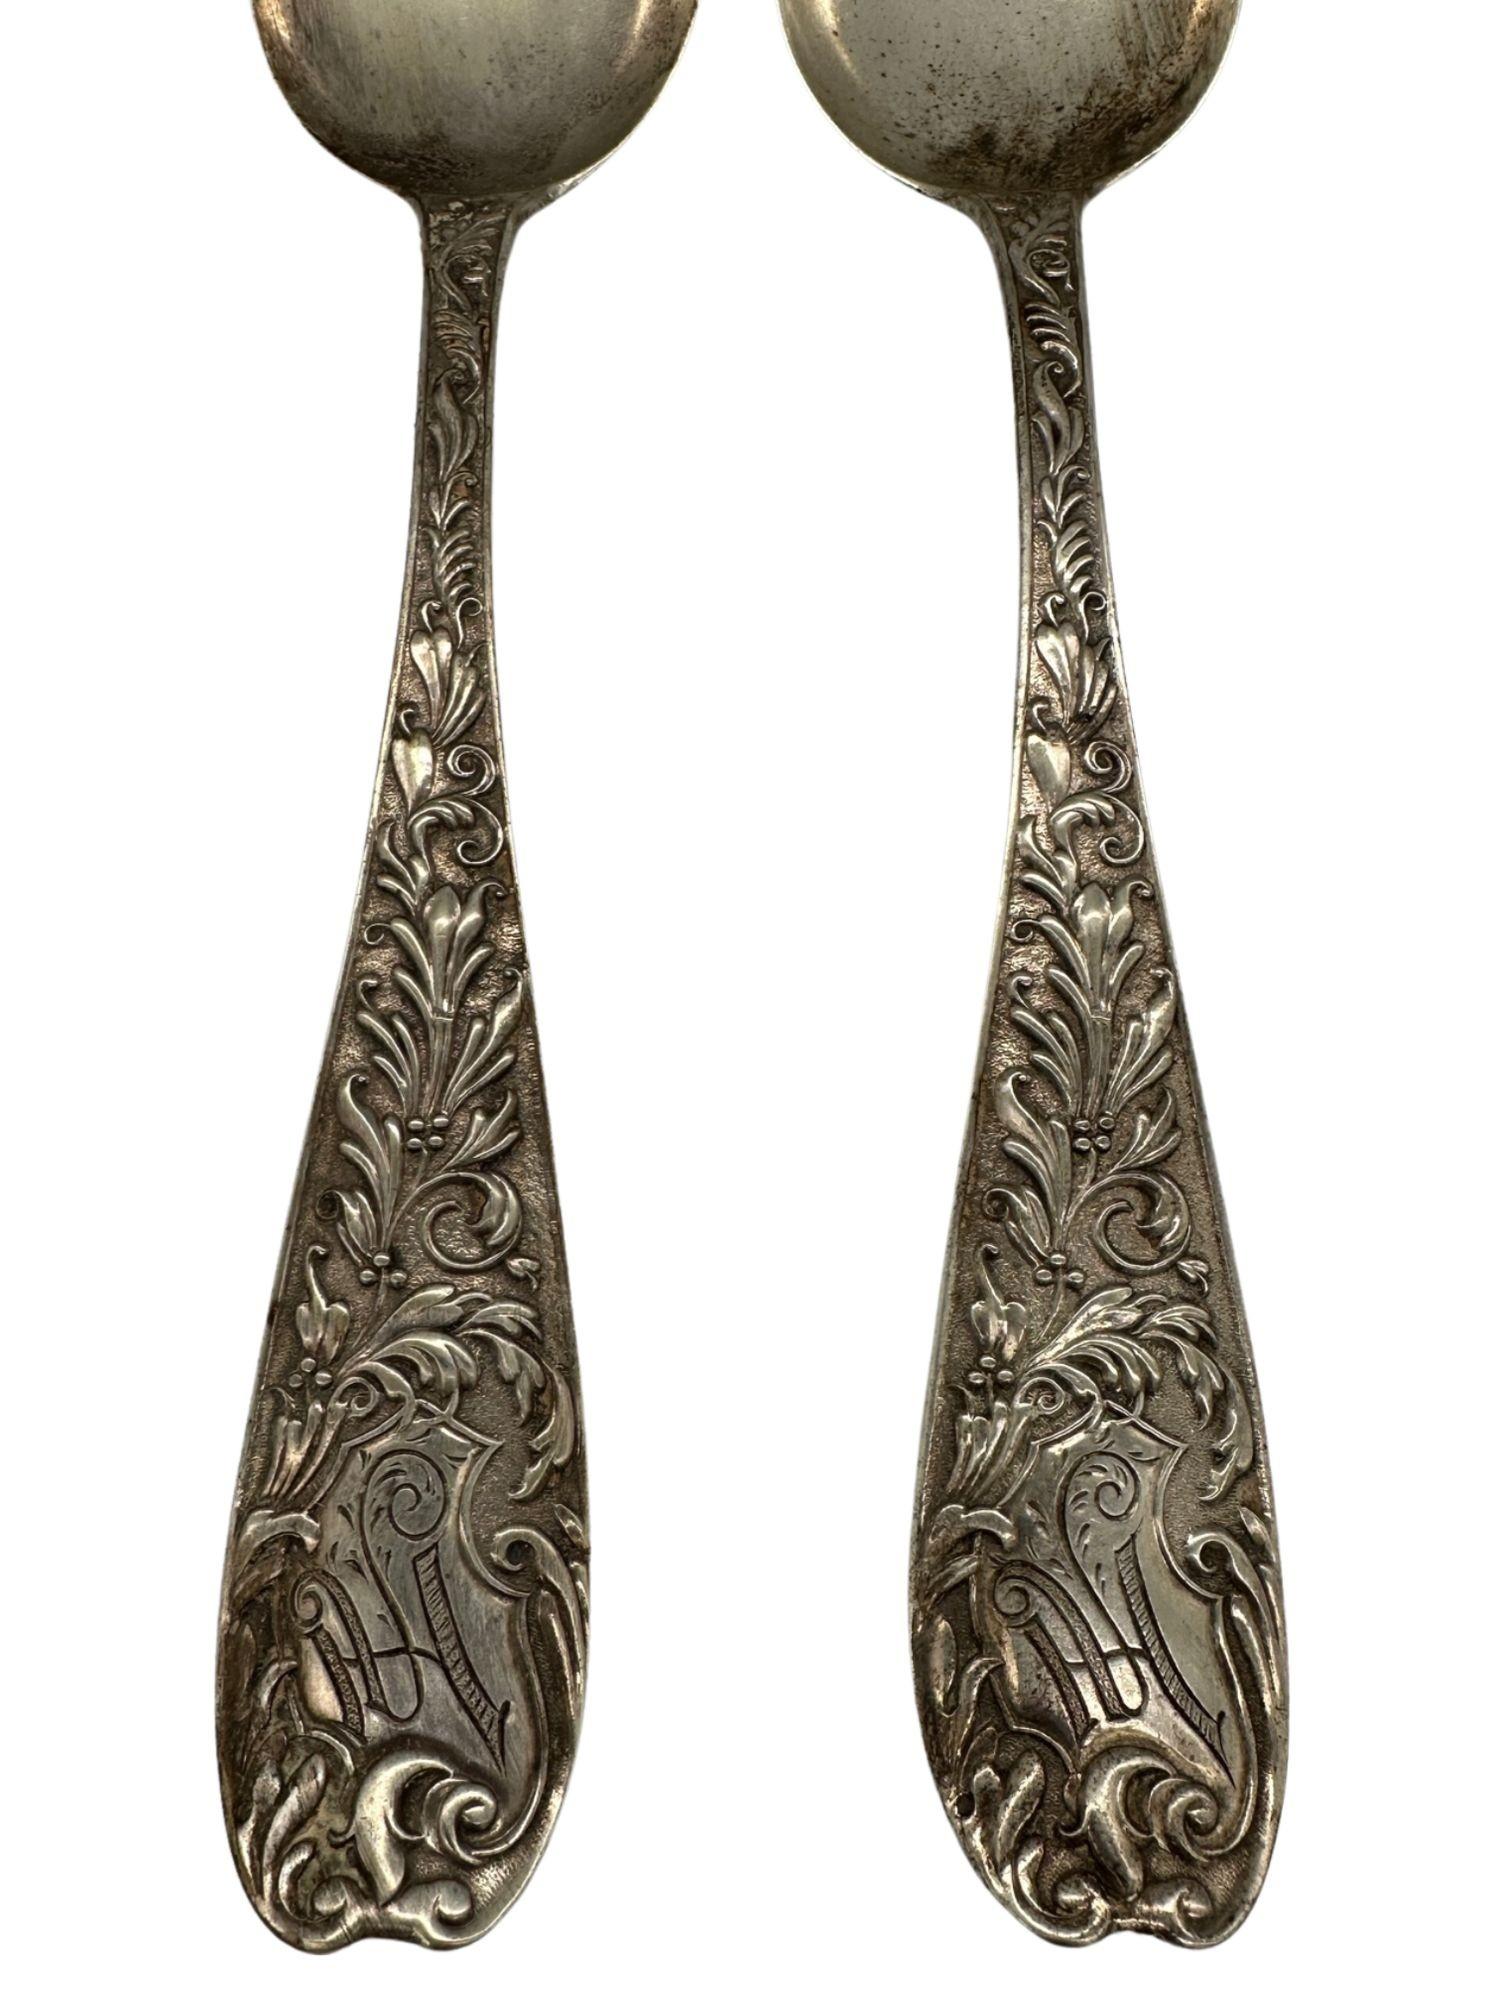 J D & S M Knowles Co Sterling Silver Serving Spoon Aeolian Pattern, 1882

The spoons are simply marked “STERLING” and have a Lion stamp of authenticity.

58 grams
8 1/4